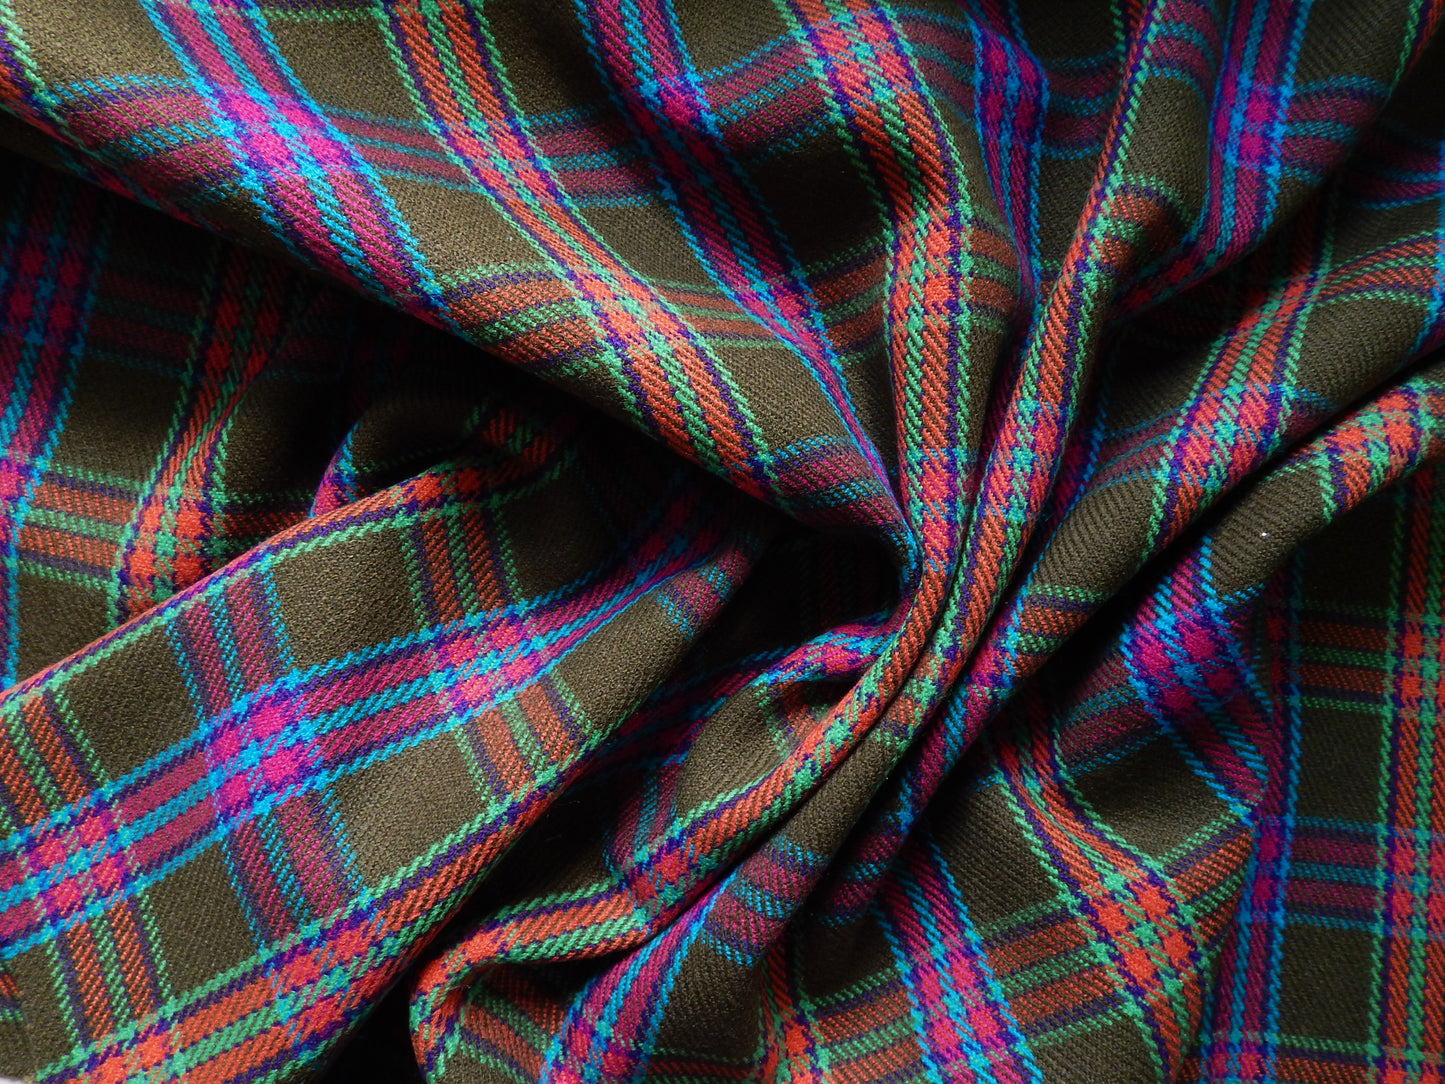 Blue, green. and pink plaid fabric